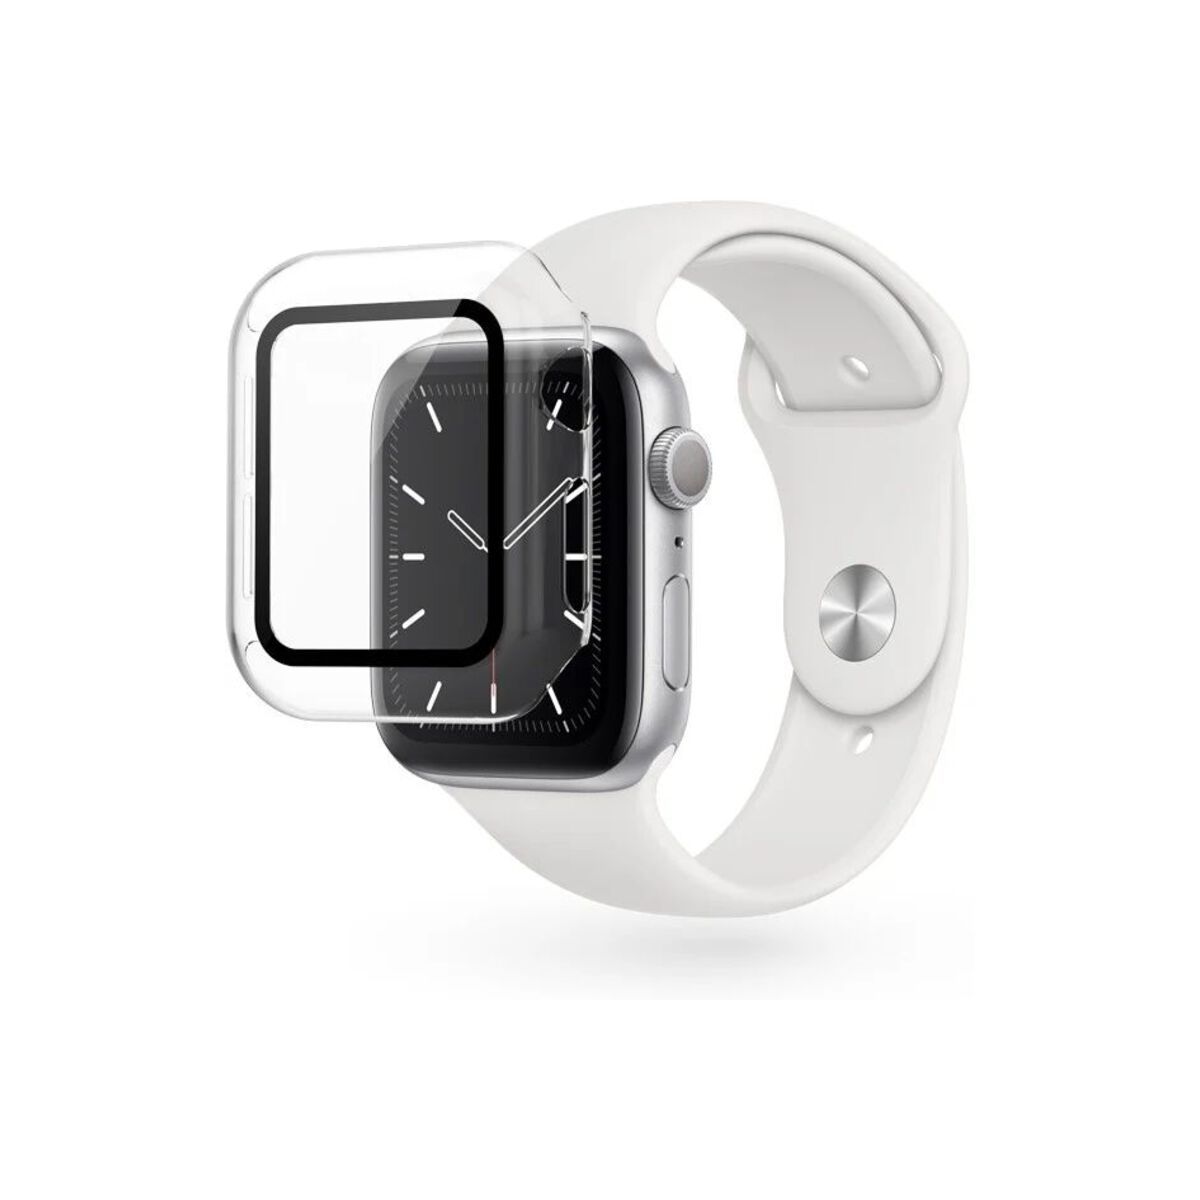 Epico Protective Cover for Apple Watch 7 TransparentProtection | Transparent | Scratch-resistant | Dust-proof | Slim Design | Easy Installation| Compatible| Accessories | Halabh.com